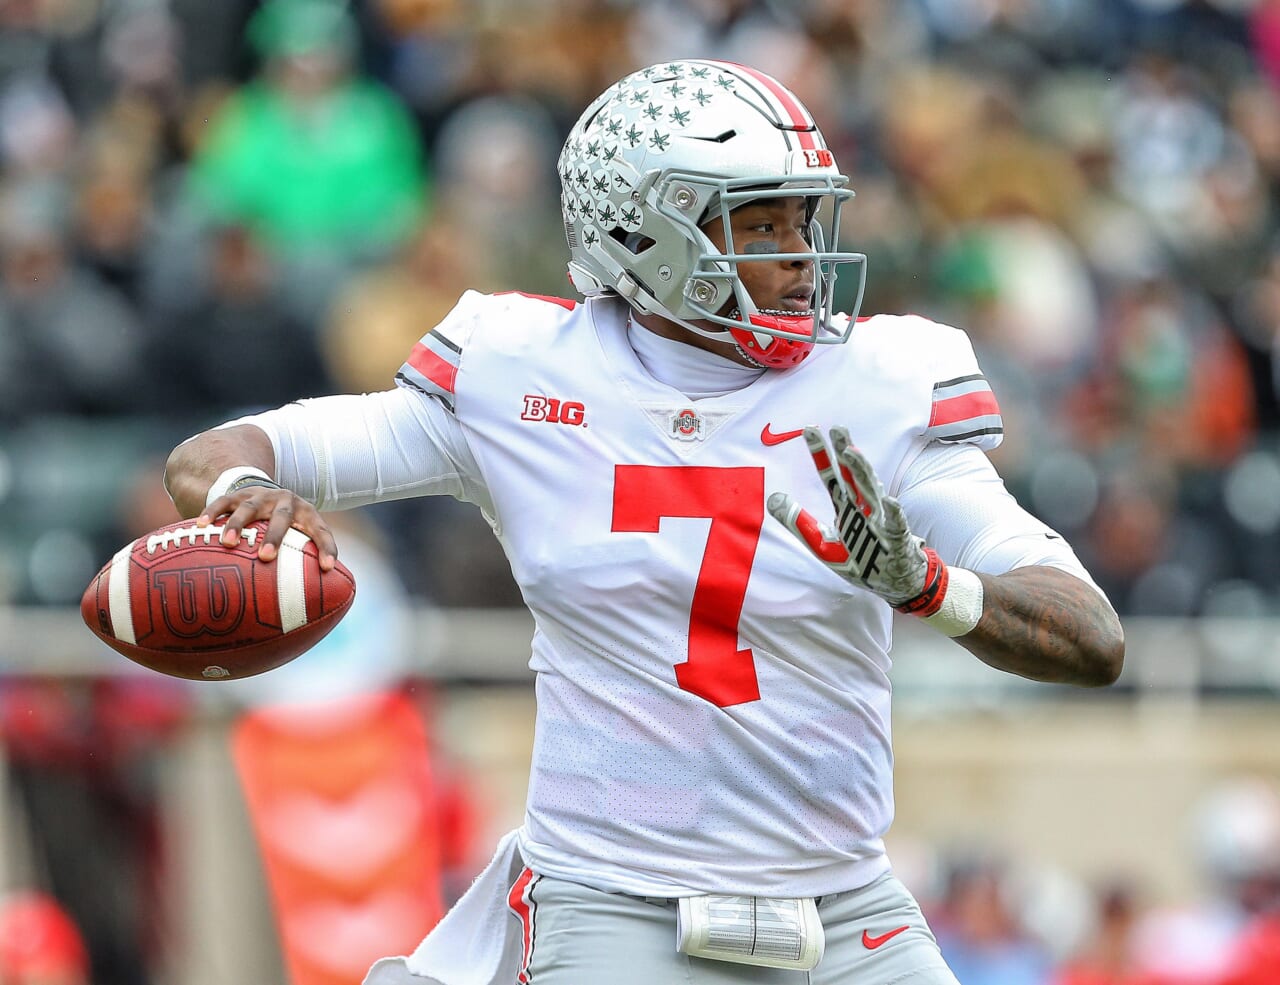 Could the New York Giants draft Dwayne Haskins with the No. 6 overall pick?